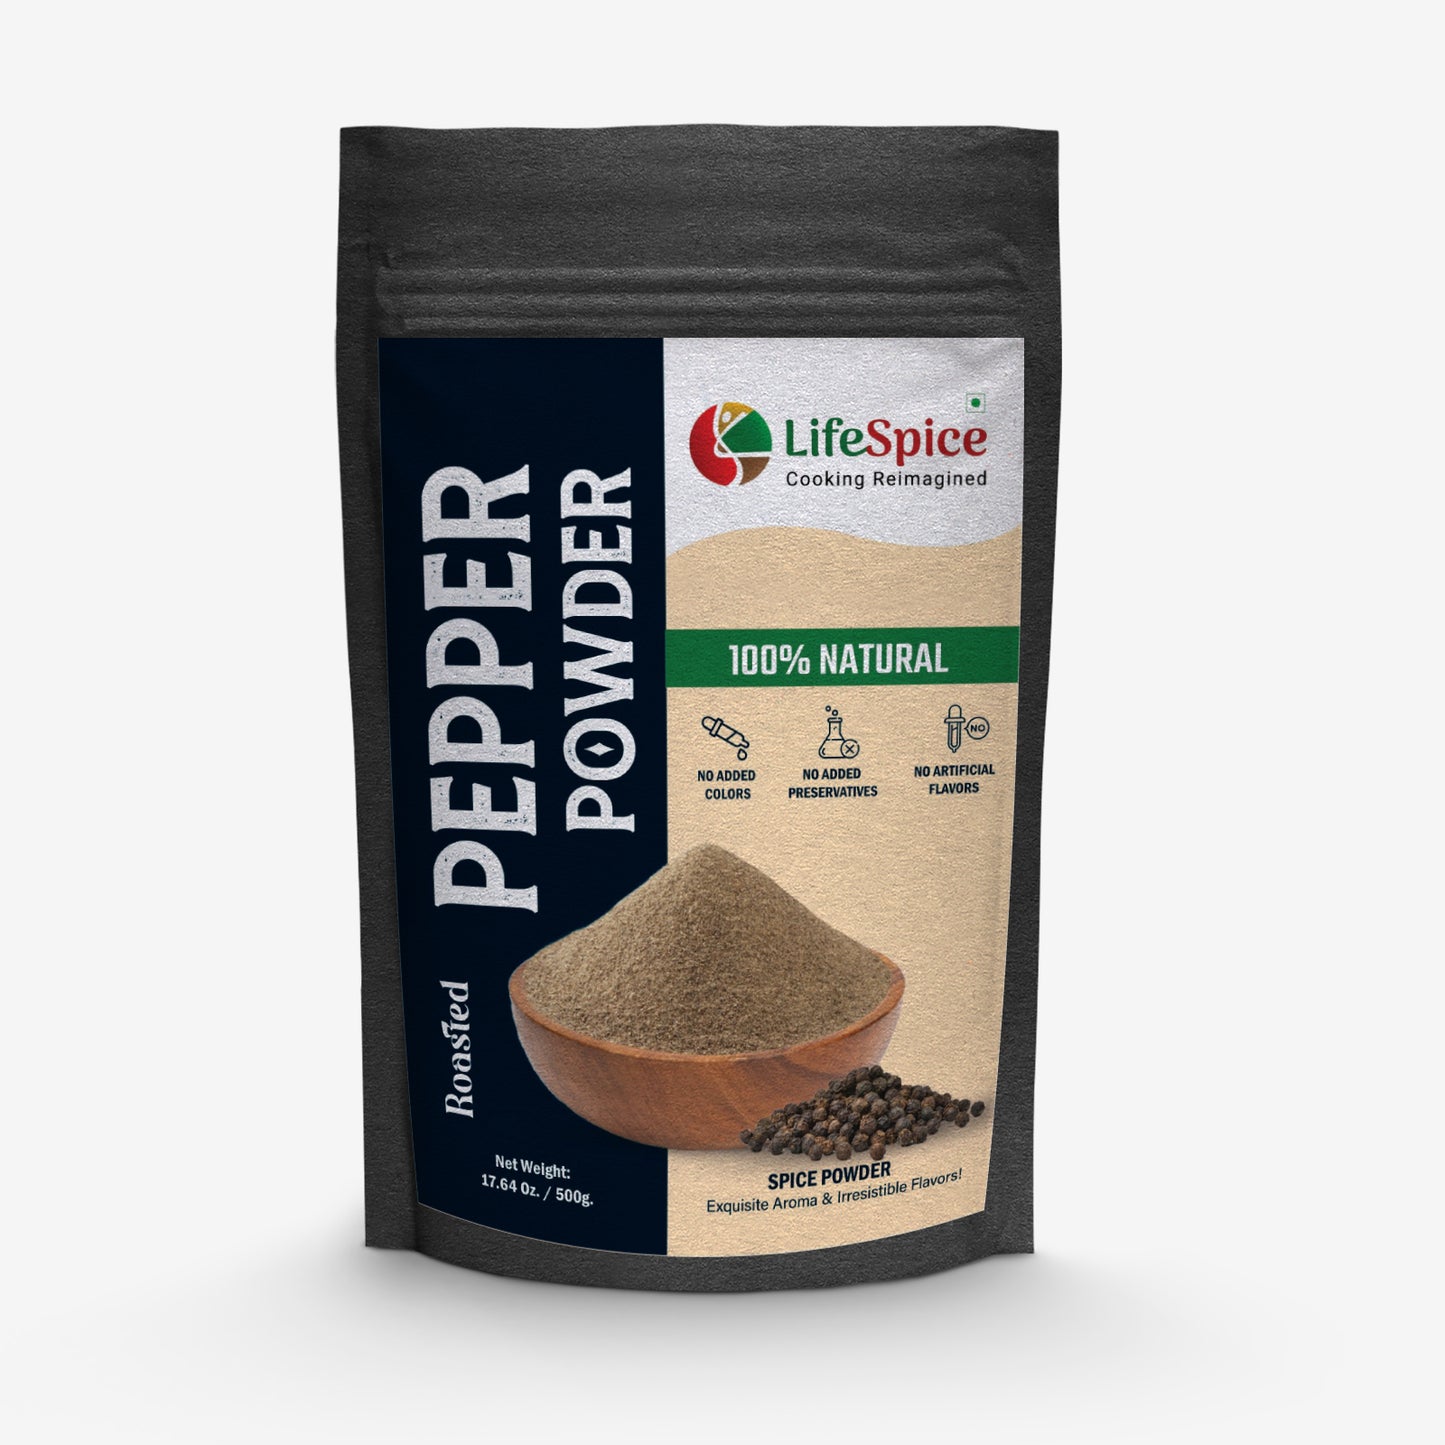 Lifespice Roasted Pepper Powder - 500g pouch